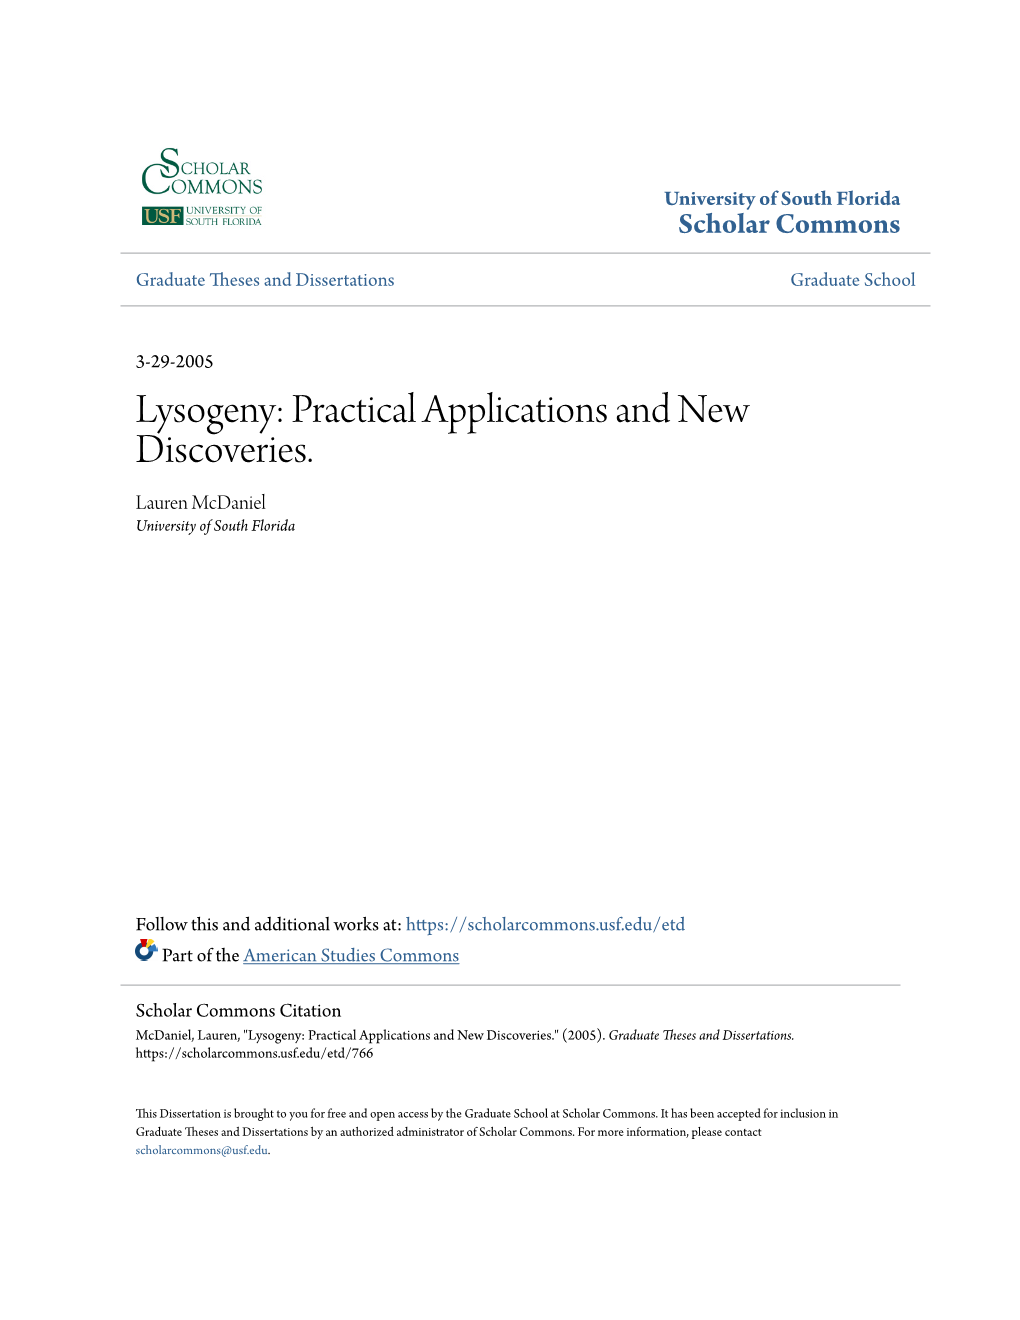 Lysogeny: Practical Applications and New Discoveries. Lauren Mcdaniel University of South Florida